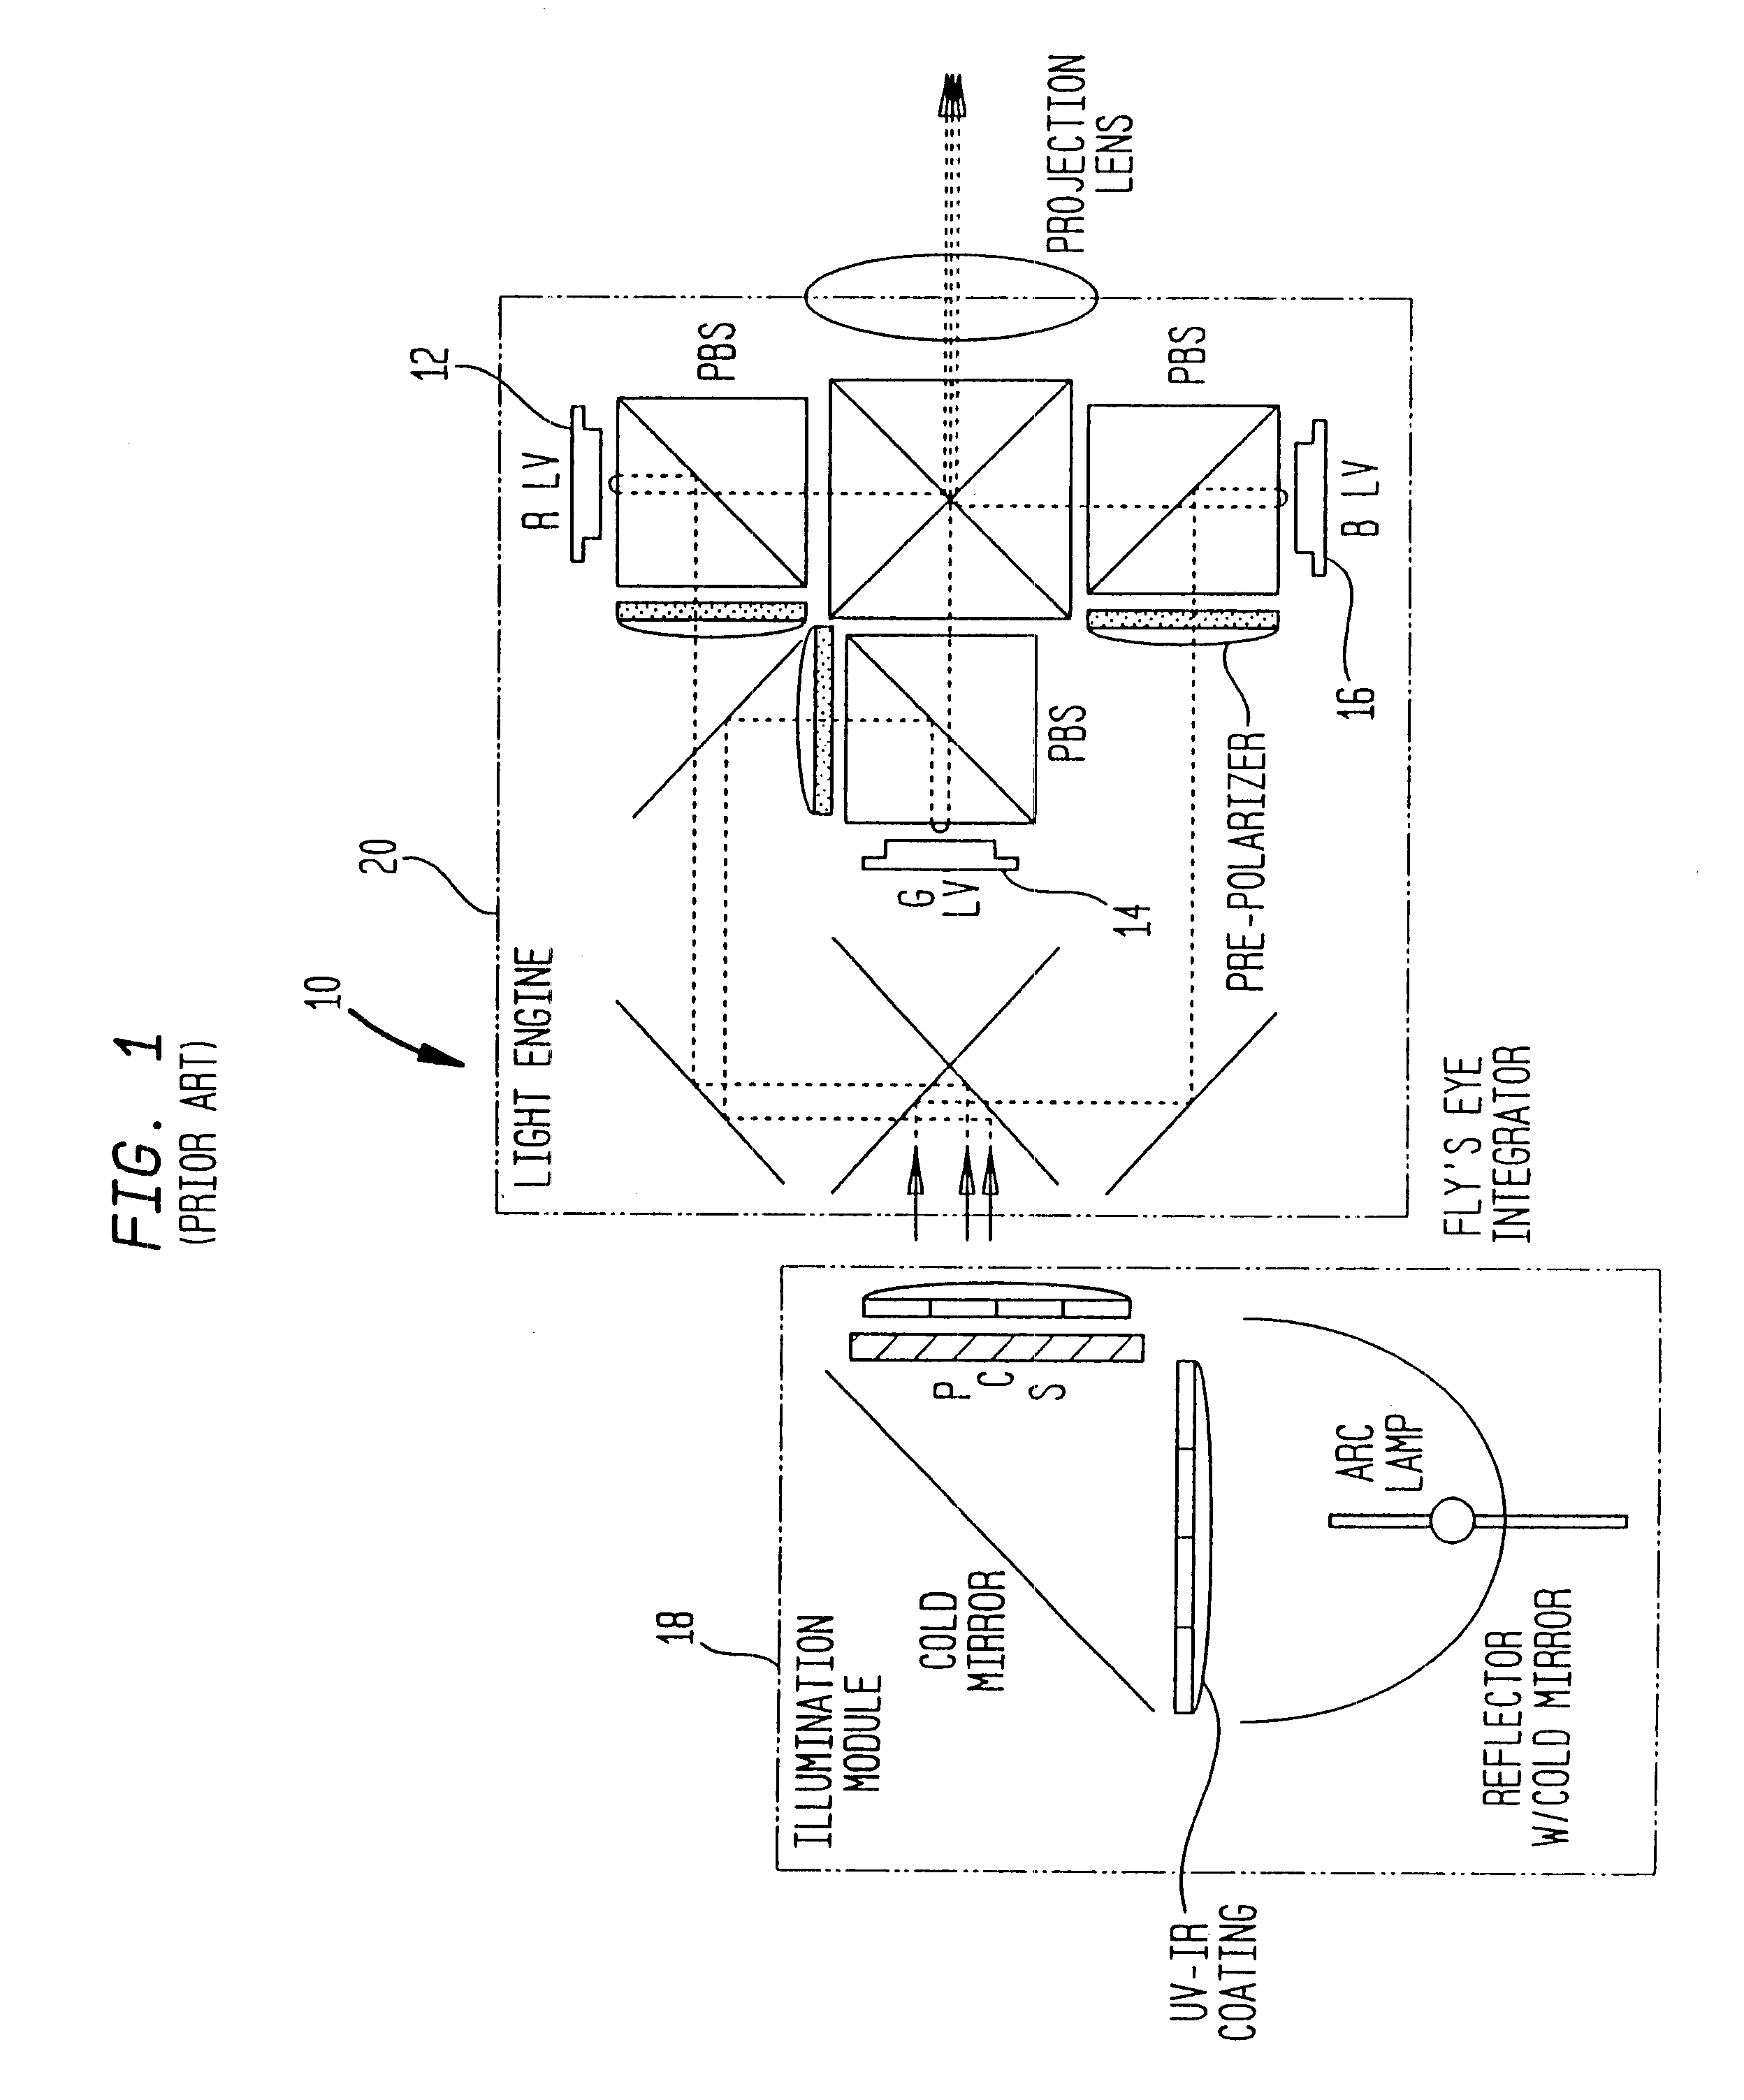 System for the automatic adaptation of projector images and a method for the implementation thereof